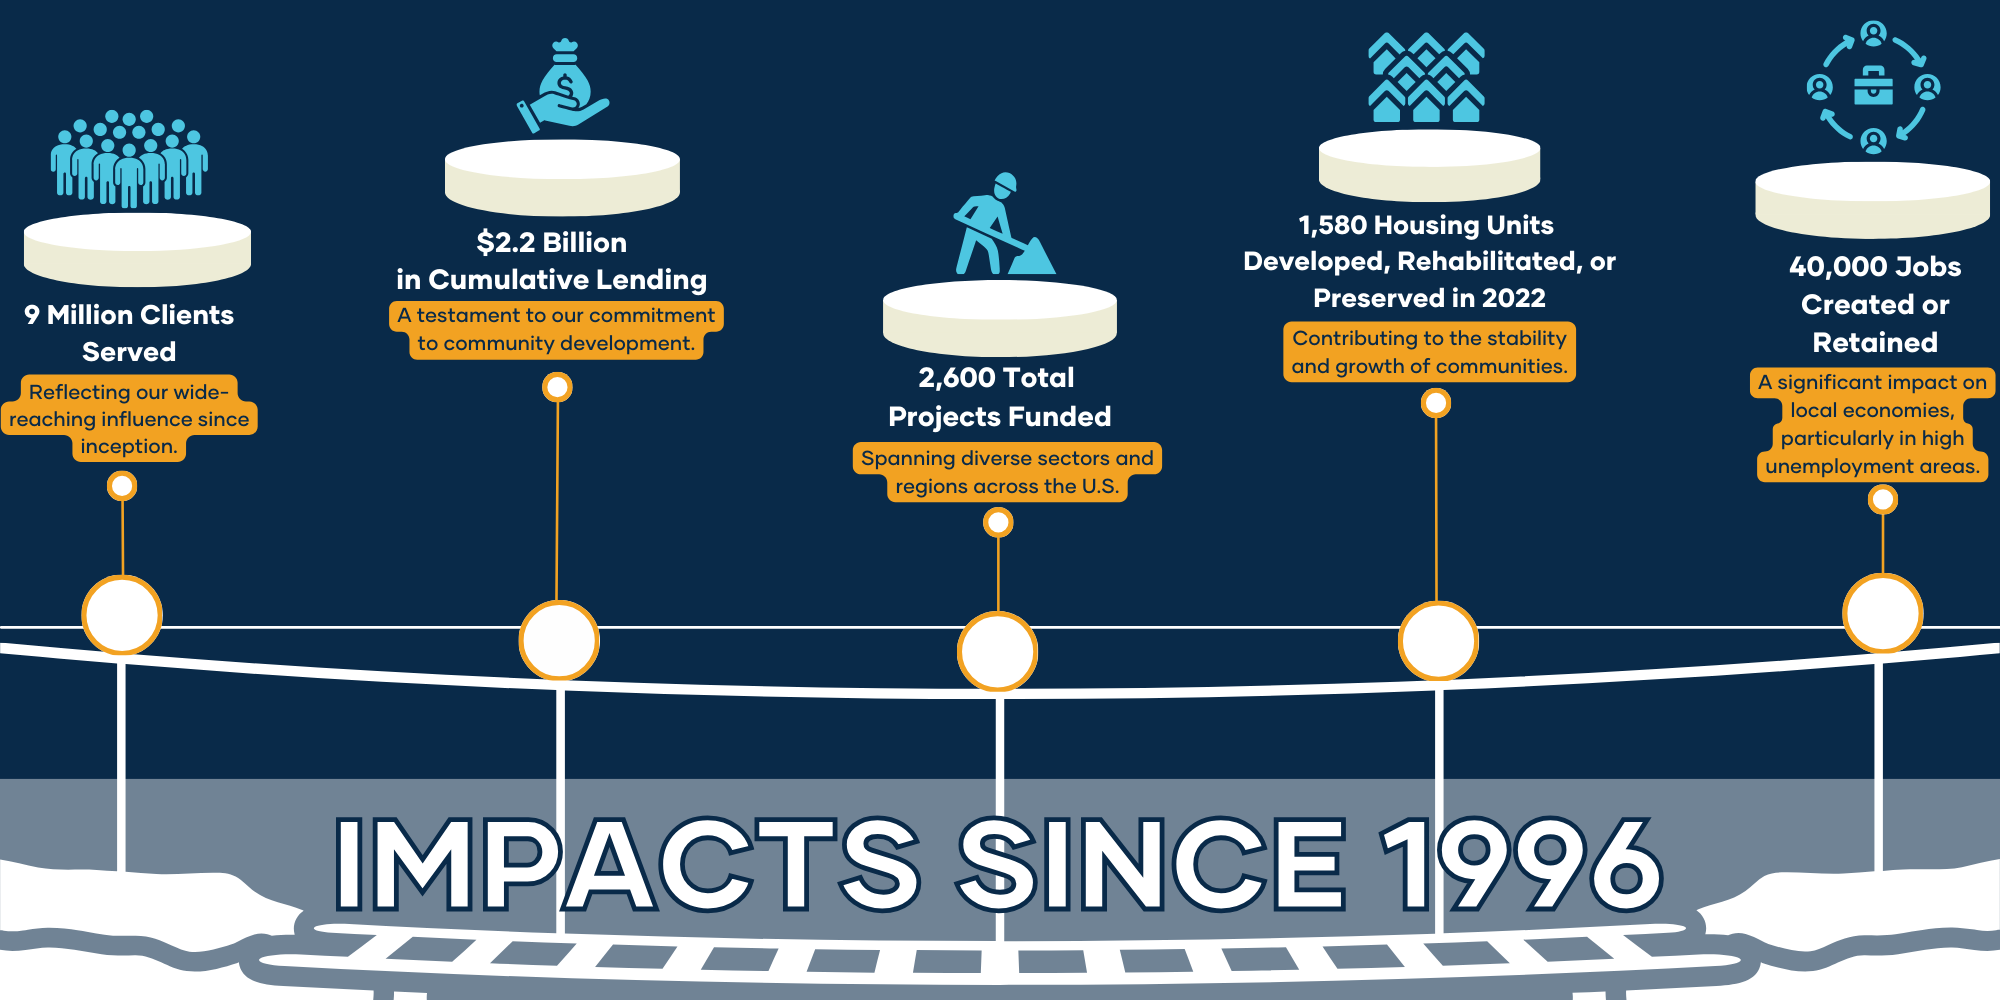 An infographic titled 'Impacts Since 1996' displays Clearinghouse CDFI's significant achievements. Four pillars illustrate key metrics: '9 Million Clients Served' shows a group of people, symbolizing extensive reach; '$2.2 Billion in Cumulative Lending' has a money bag icon, indicating substantial financial support to communities; '2,600 Total Projects Funded' features a worker, representing diverse initiatives across the U.S.; '1,580 Housing Units Developed, Rehabilitated, or Preserved in 2022' depicts housing, contributing to community stability; '40,000 Jobs Created or Retained' with people icons, reflecting job creation, especially in areas with high unemployment. The infographic is set against a bridge silhouette with connecting lines, reinforcing the theme of connectivity and support.